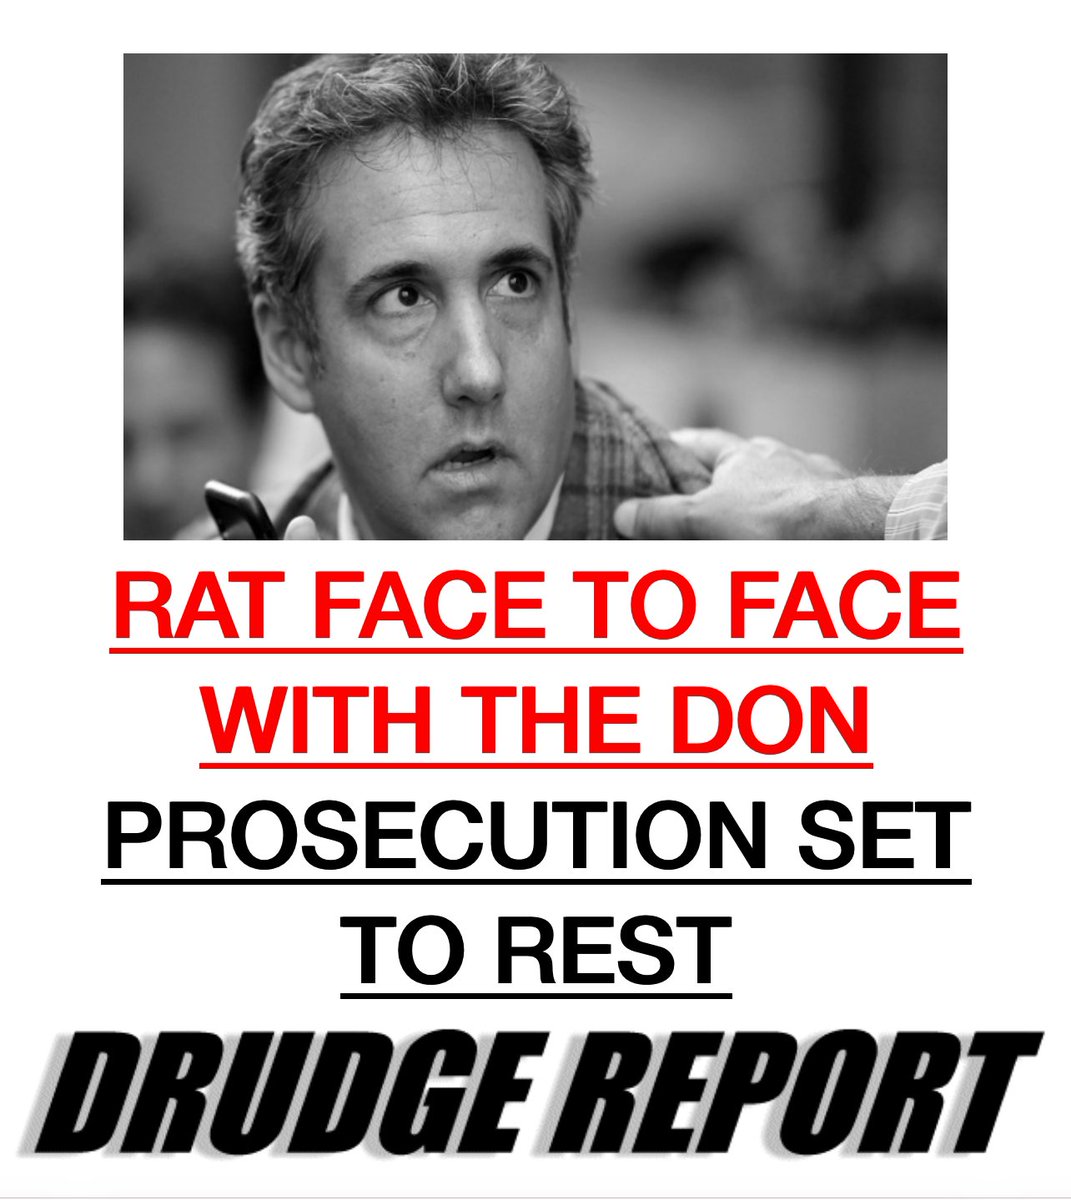 Drudge Report homepage as we await the start of Day 16 in Donald Trump’s hush money trial where Michael Cohen will take the stand